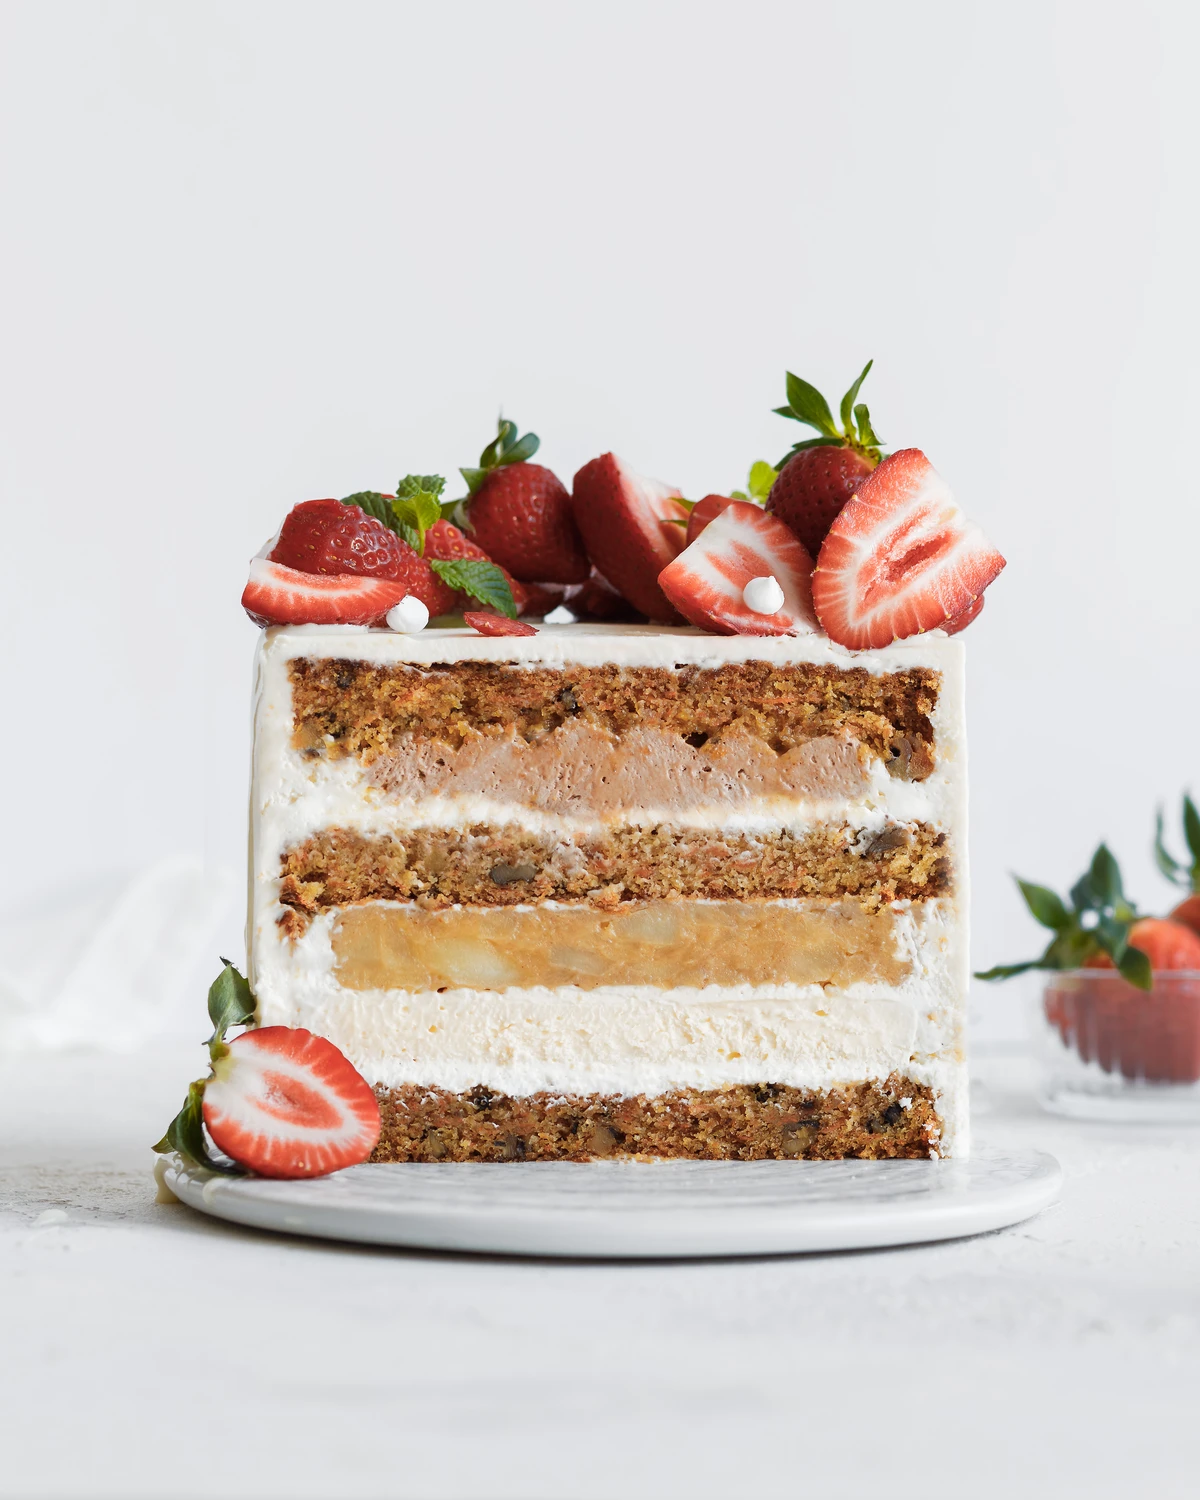 Carrot cake with apple layer. There is a cake on the table. It is decorated with strawberries. Visible carrot cakes, apple layers, and chocolate cream pyramids between layers of carrot cakes.